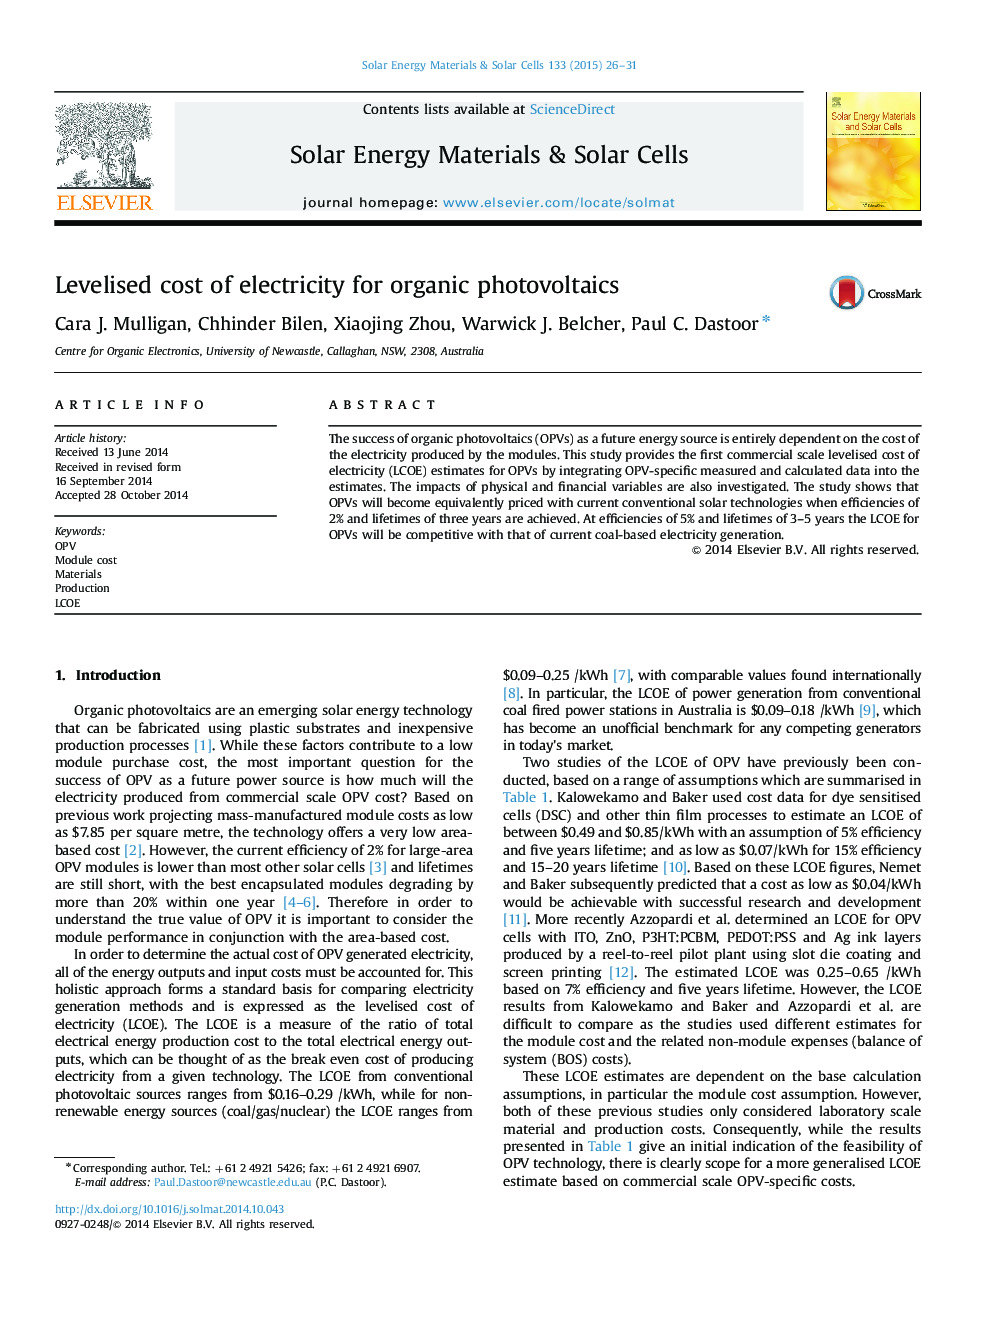 Levelised cost of electricity for organic photovoltaics